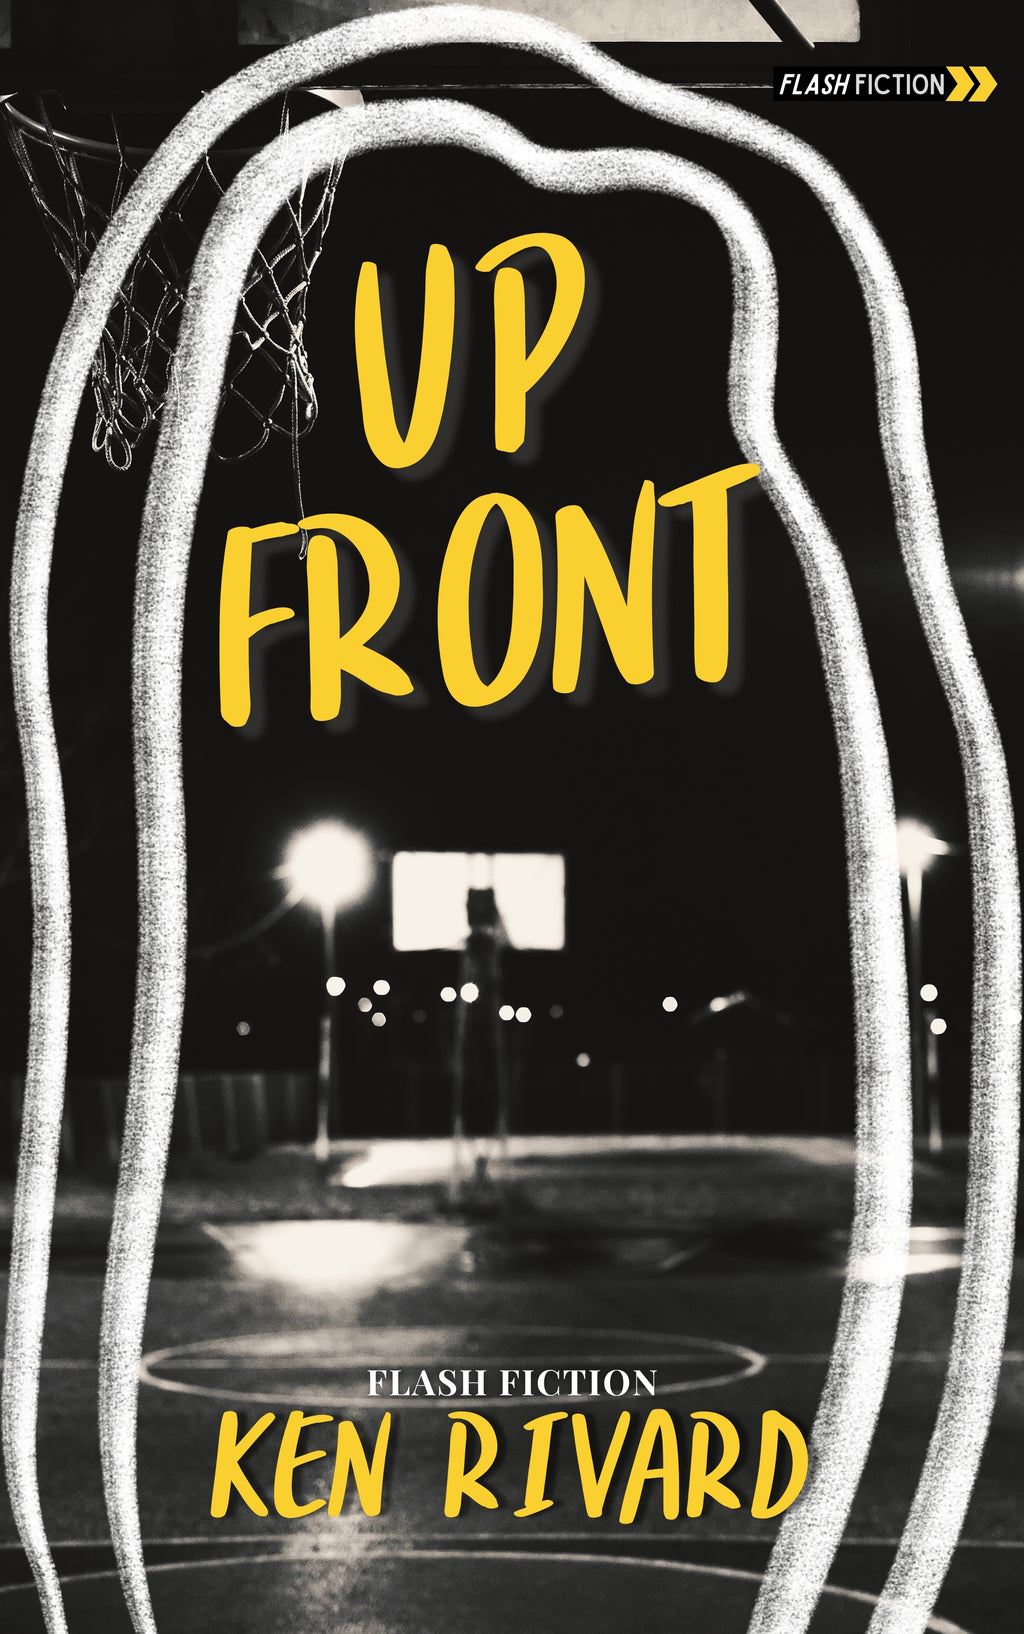 Up Front - Flash Fiction by Ken Rivard